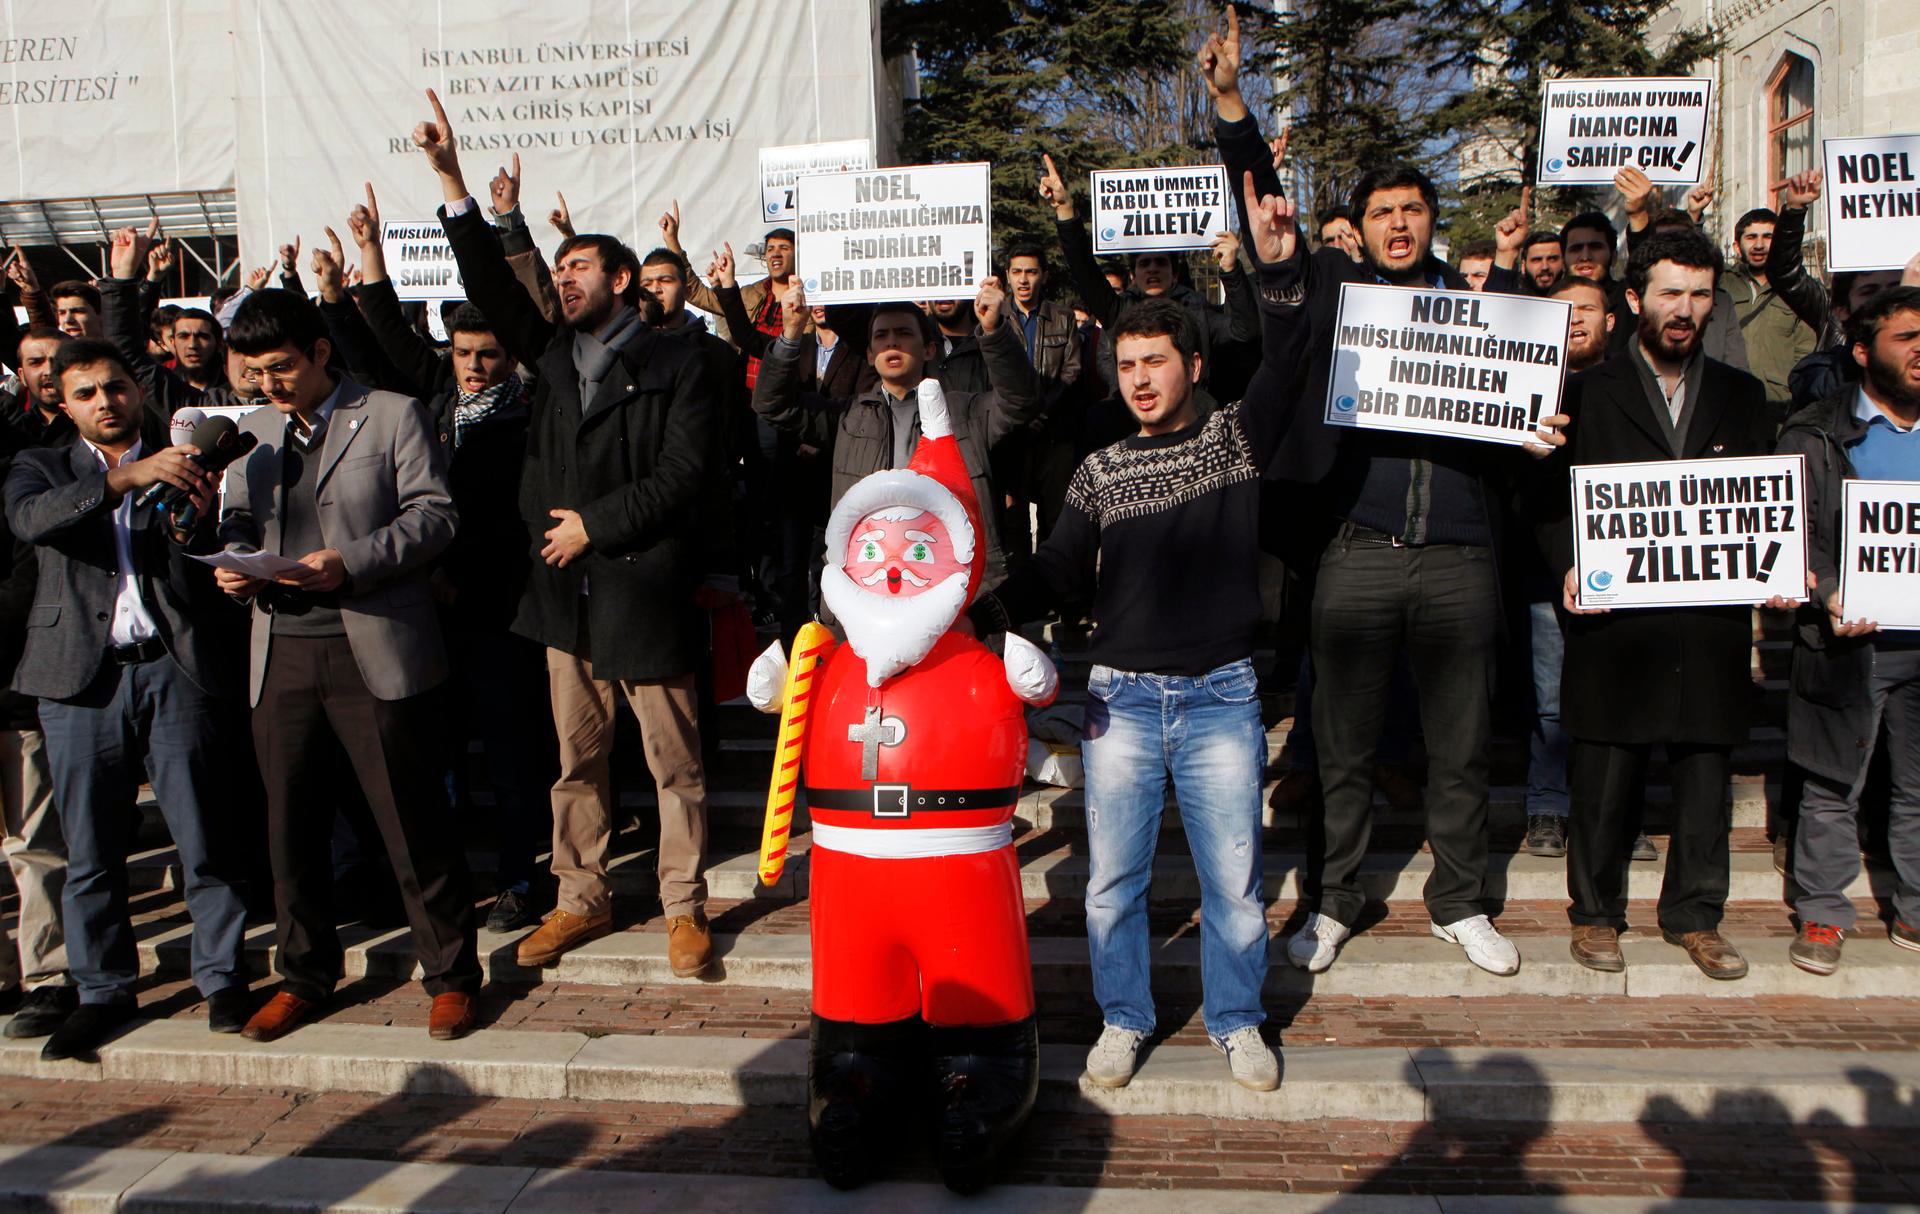 Turkish Islamist protesters shout slogans against Noel celebrations as they hold an inflatable Santa Claus toy during a demonstration at Beyazit Square in Istanbul December 26, 2013. The sign (front, 2nd) reads: "Christmas is a blow to our Islamism".